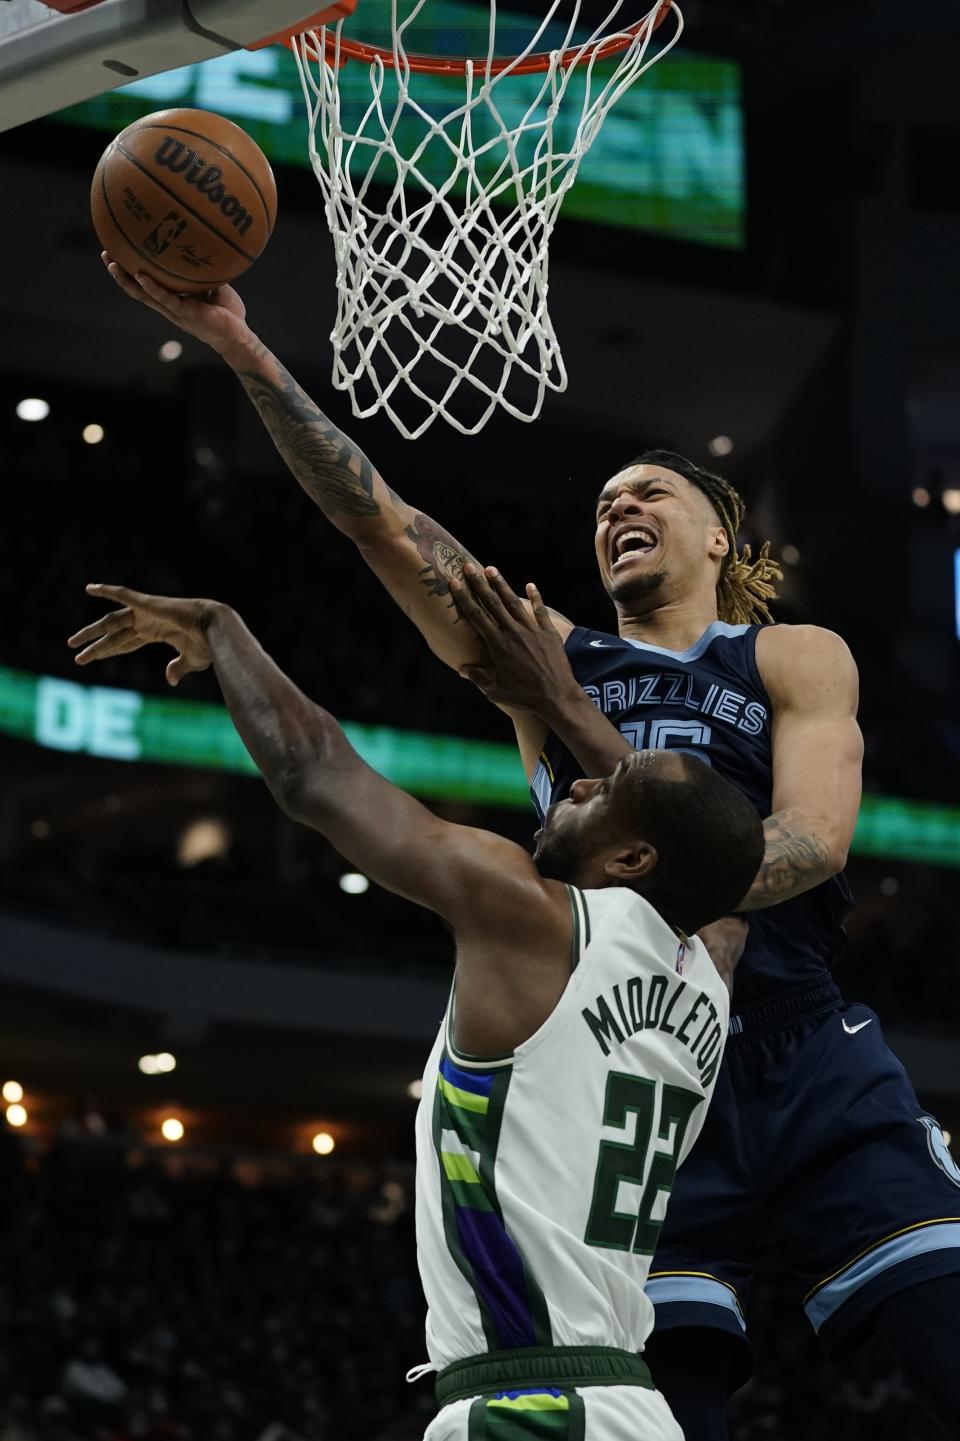 Memphis Grizzlies' Jon Teske is fouled by Milwaukee Bucks' Khris Middleton during the second half of an NBA basketball game Wednesday, Jan. 19, 2022, in Milwaukee. (AP Photo/Morry Gash)